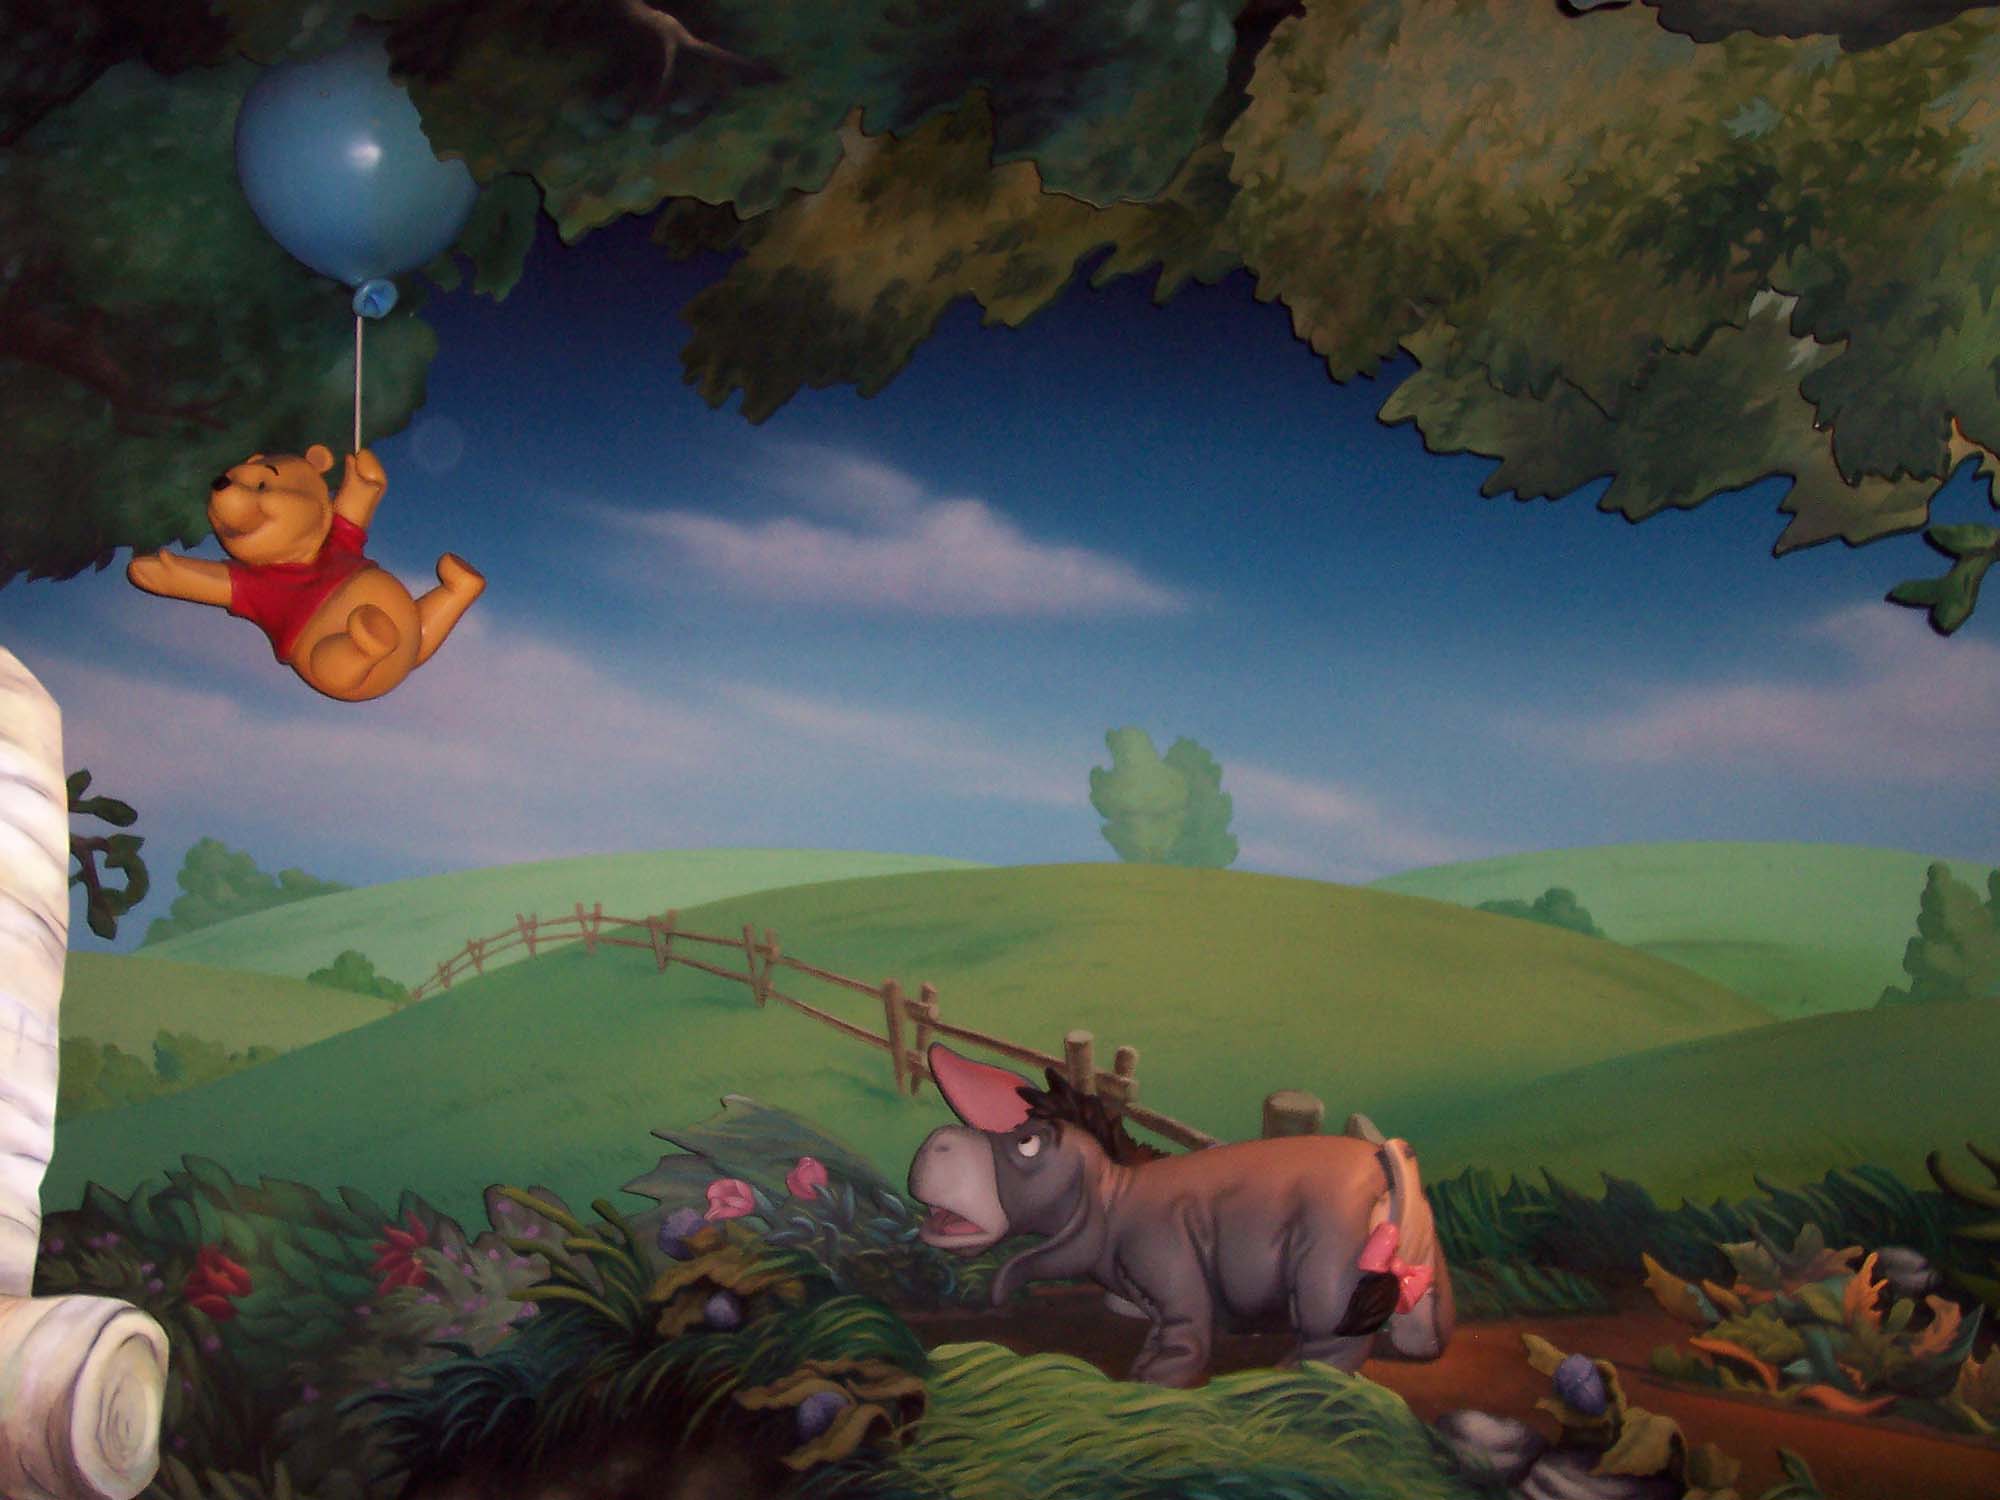 Fantasyland - The Many Adventures of Winnie the Pooh